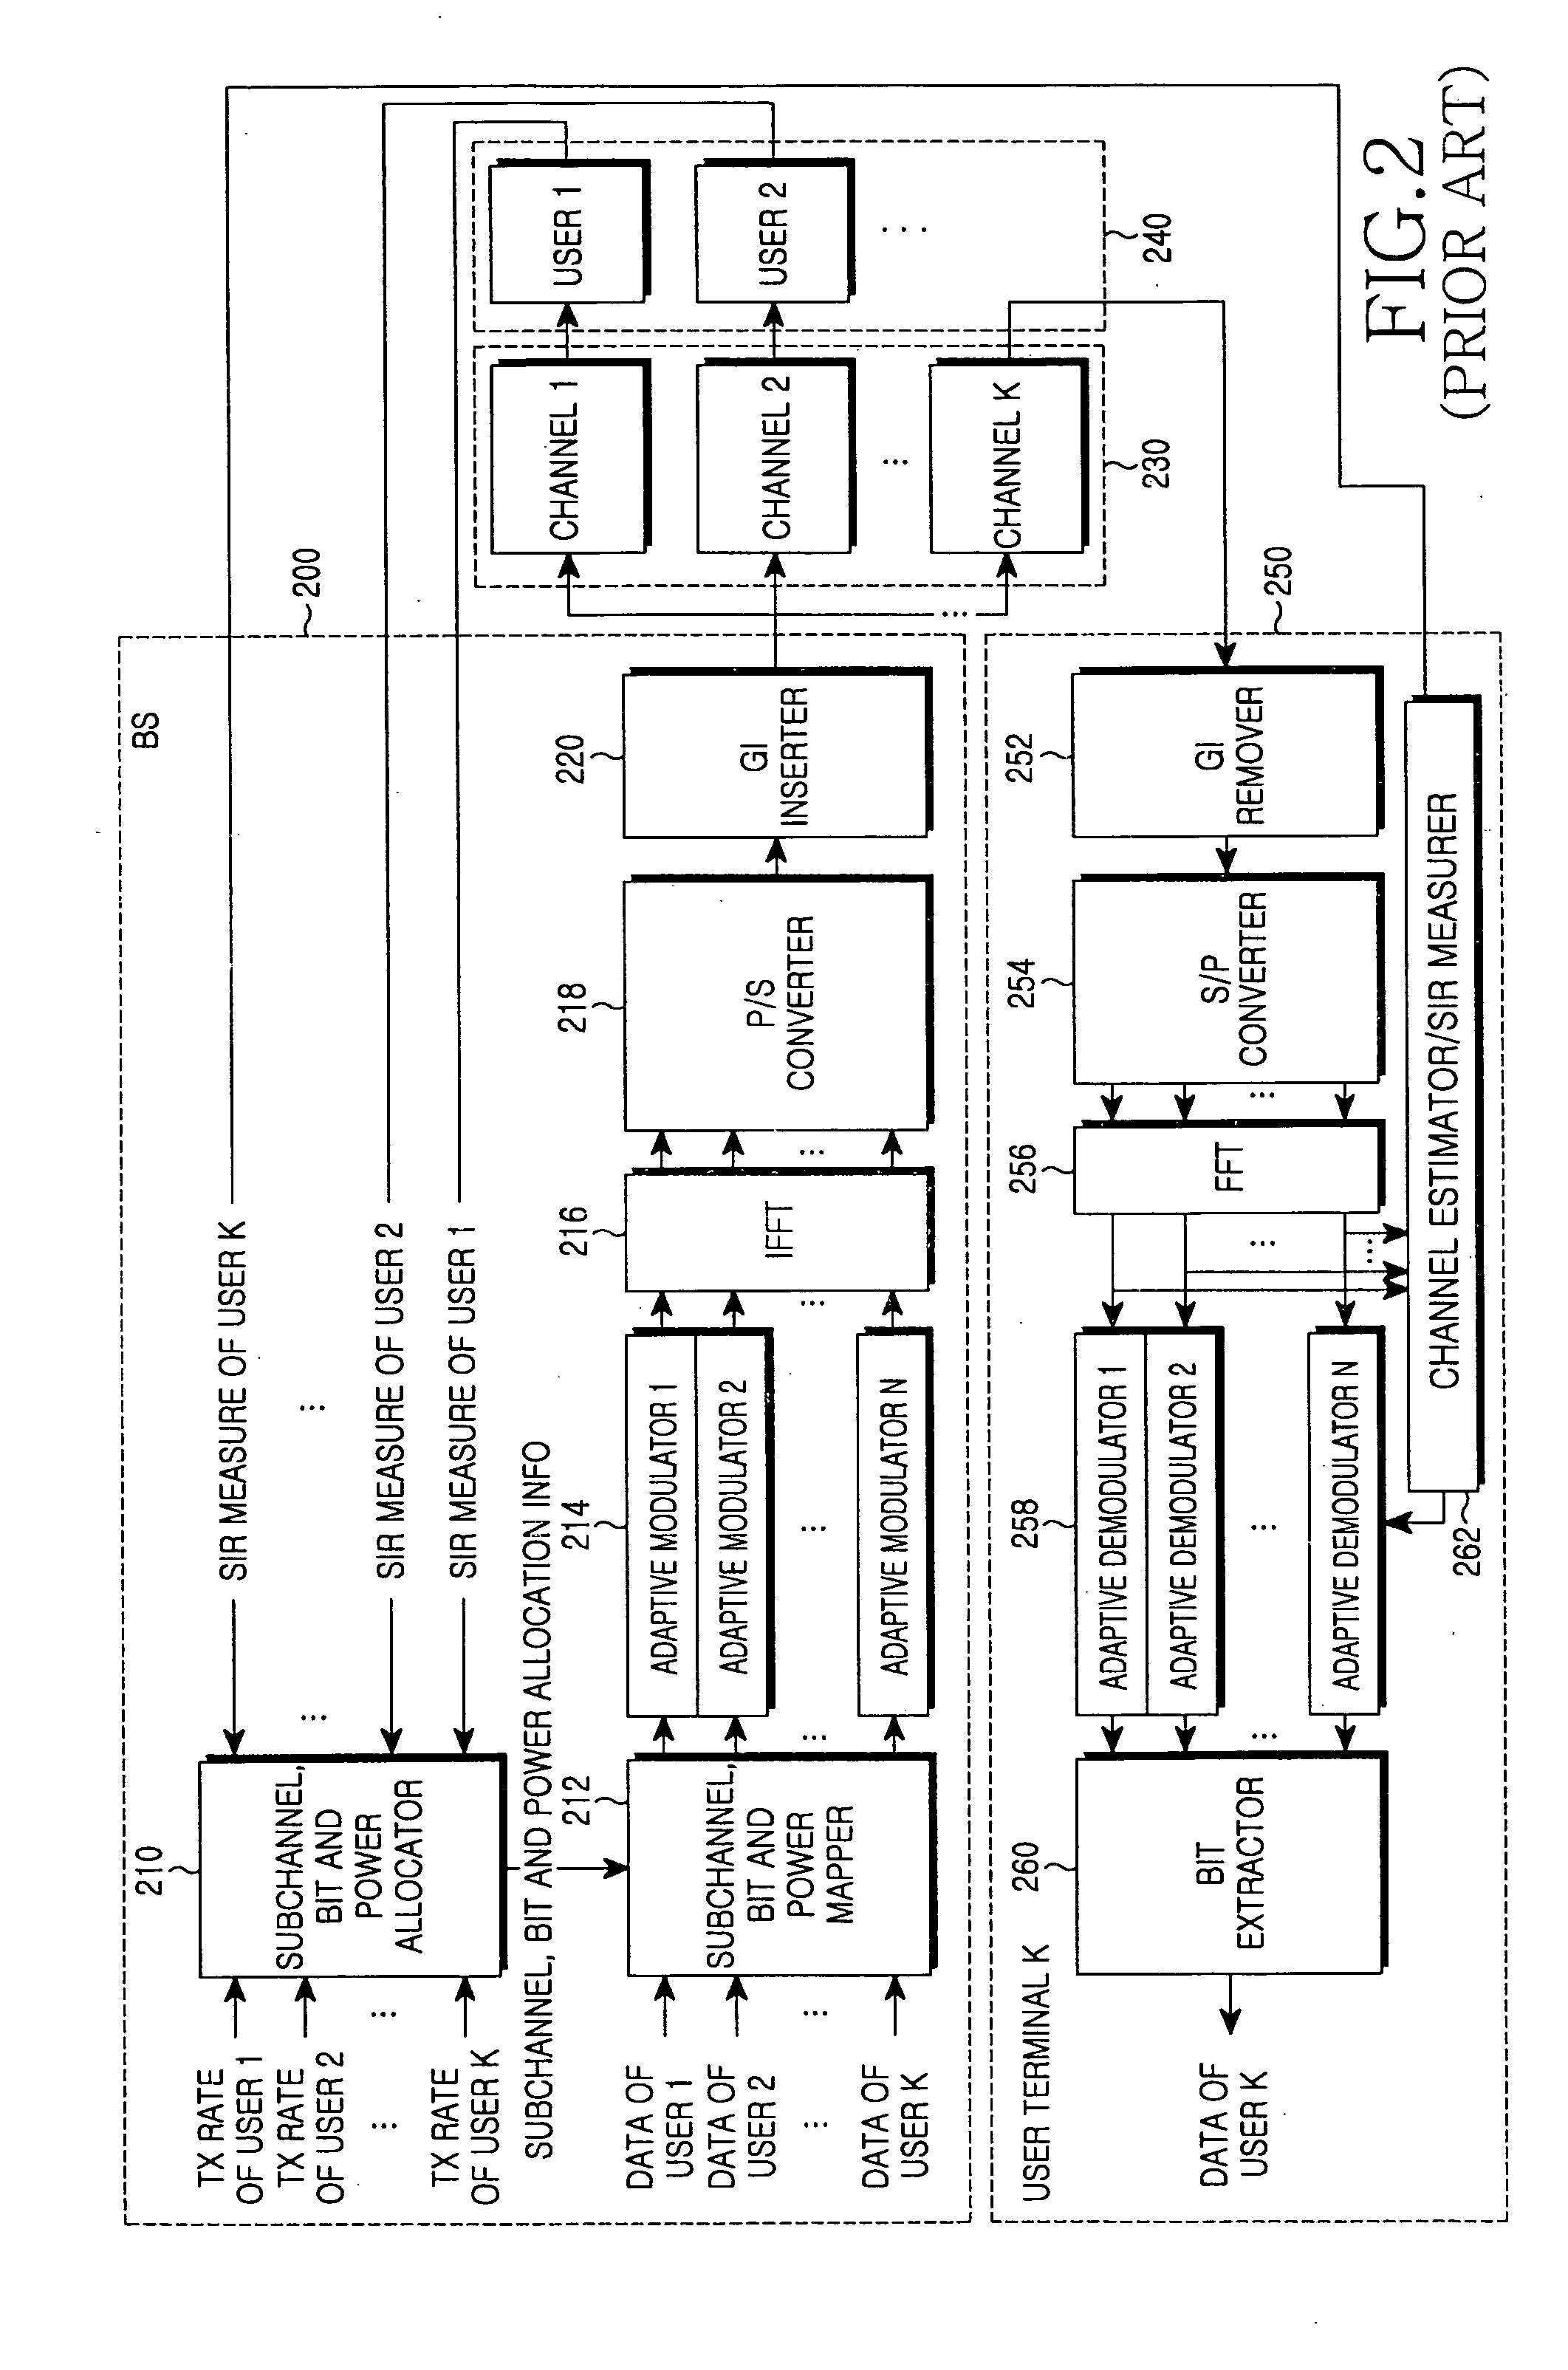 Apparatus and method for estimating a signal power to interference power ratio in a wireless communication system